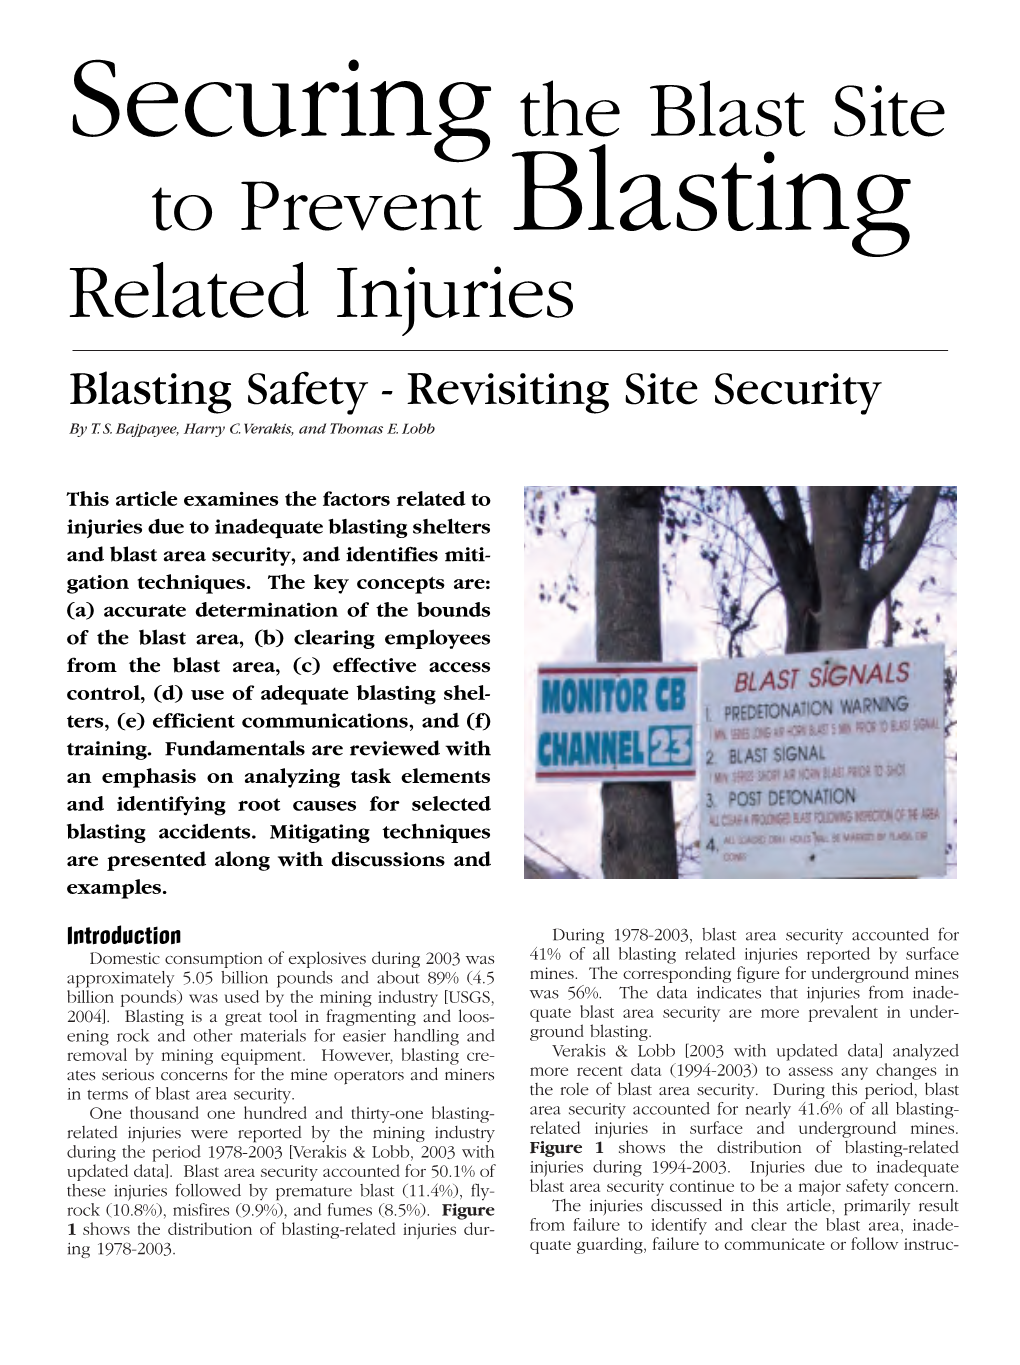 Securing the Blast Site to Prevent Blasting Related Injuries Blasting Safety - Revisiting Site Security by T